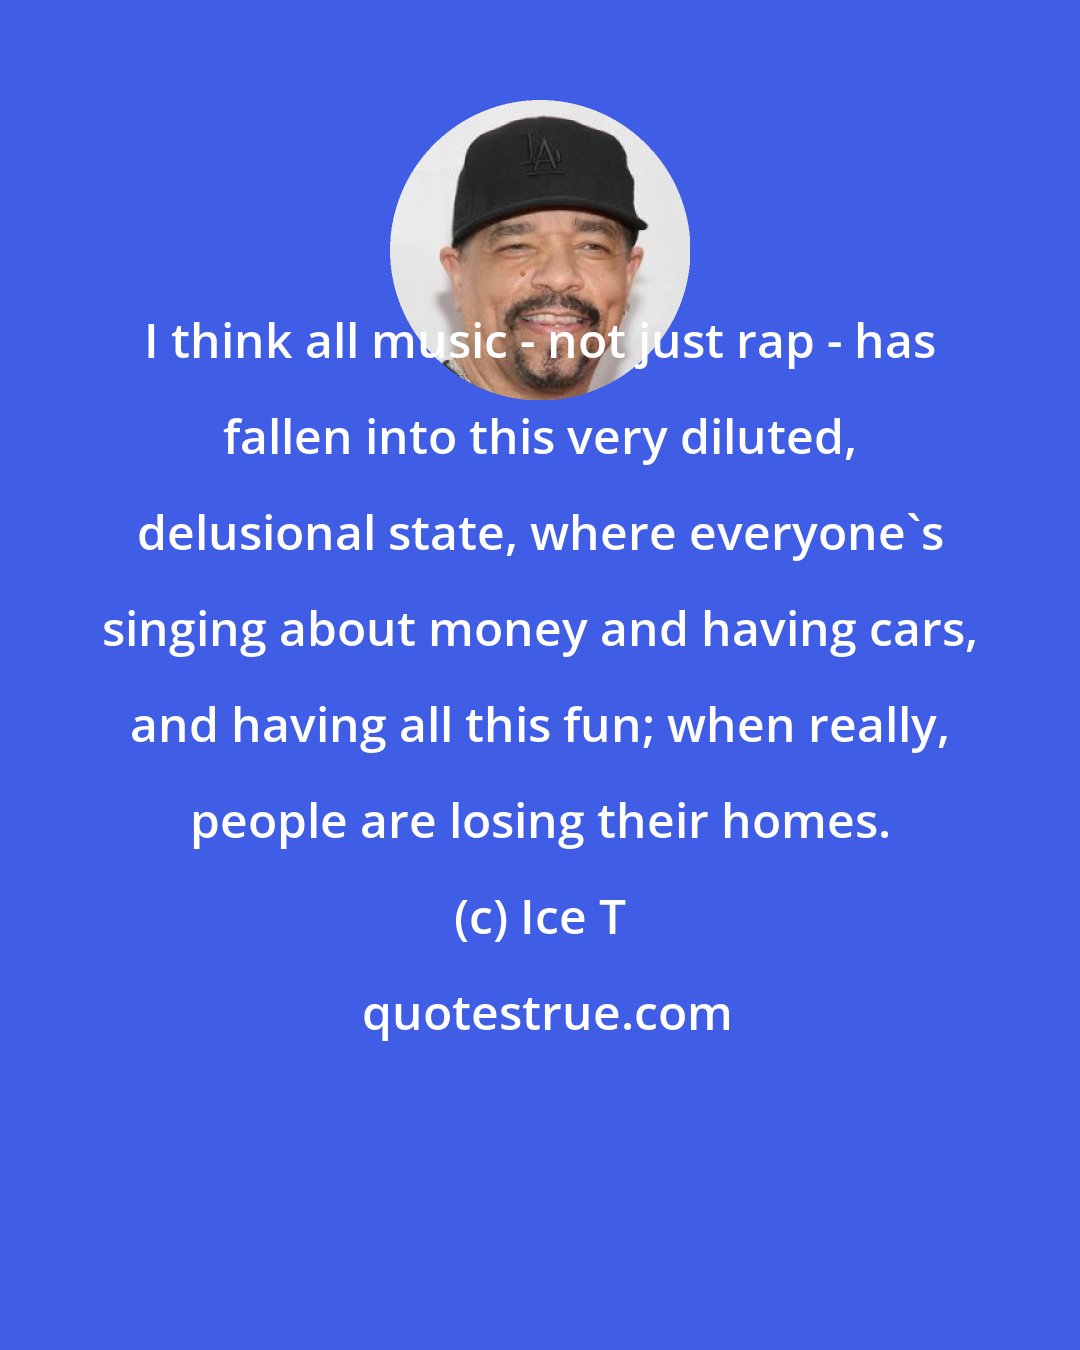 Ice T: I think all music - not just rap - has fallen into this very diluted, delusional state, where everyone's singing about money and having cars, and having all this fun; when really, people are losing their homes.